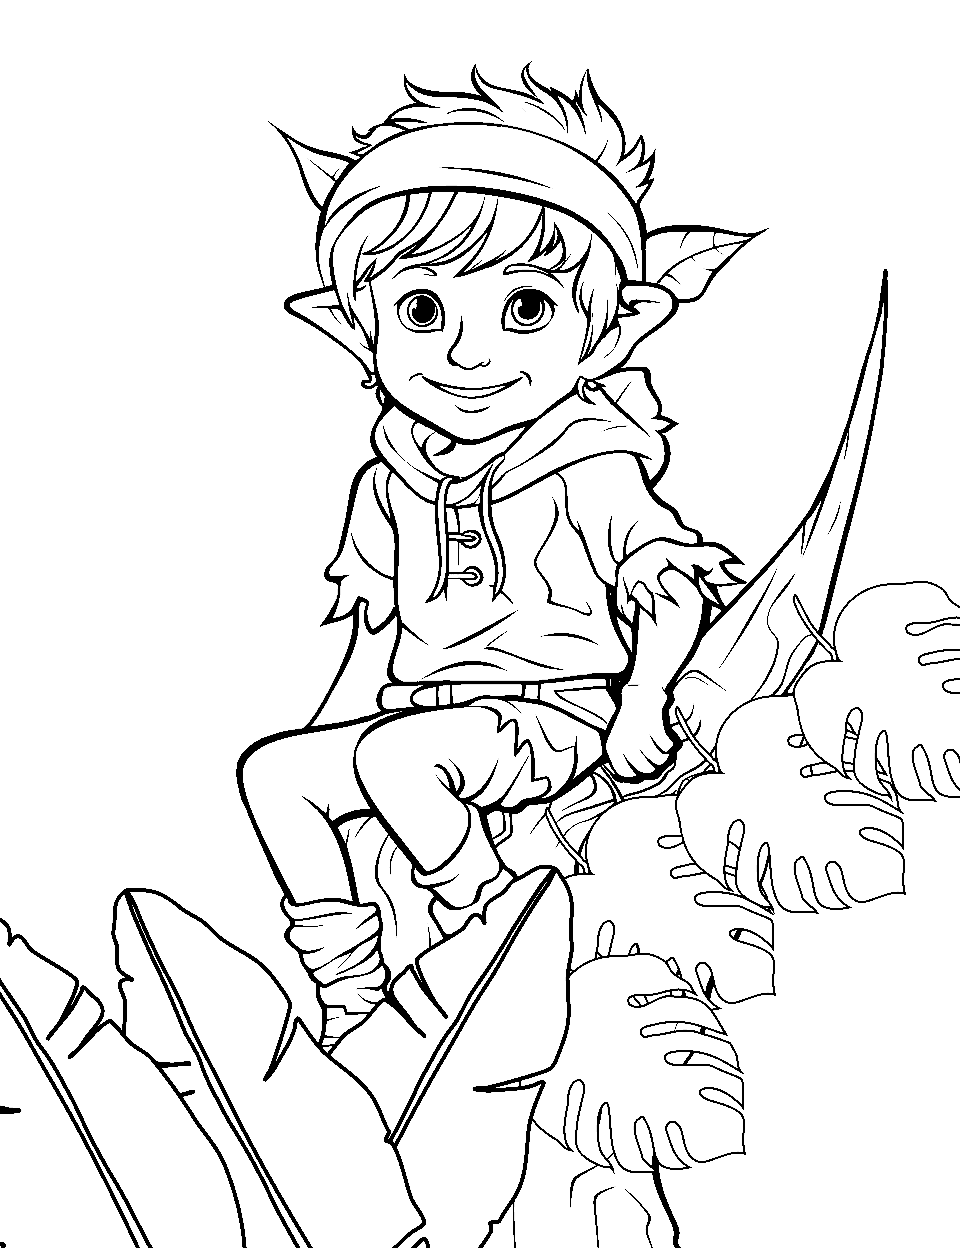 Wood Elf on a Tree Branch Coloring Page - A wood elf sitting on a tree branch, surrounded by leaves.